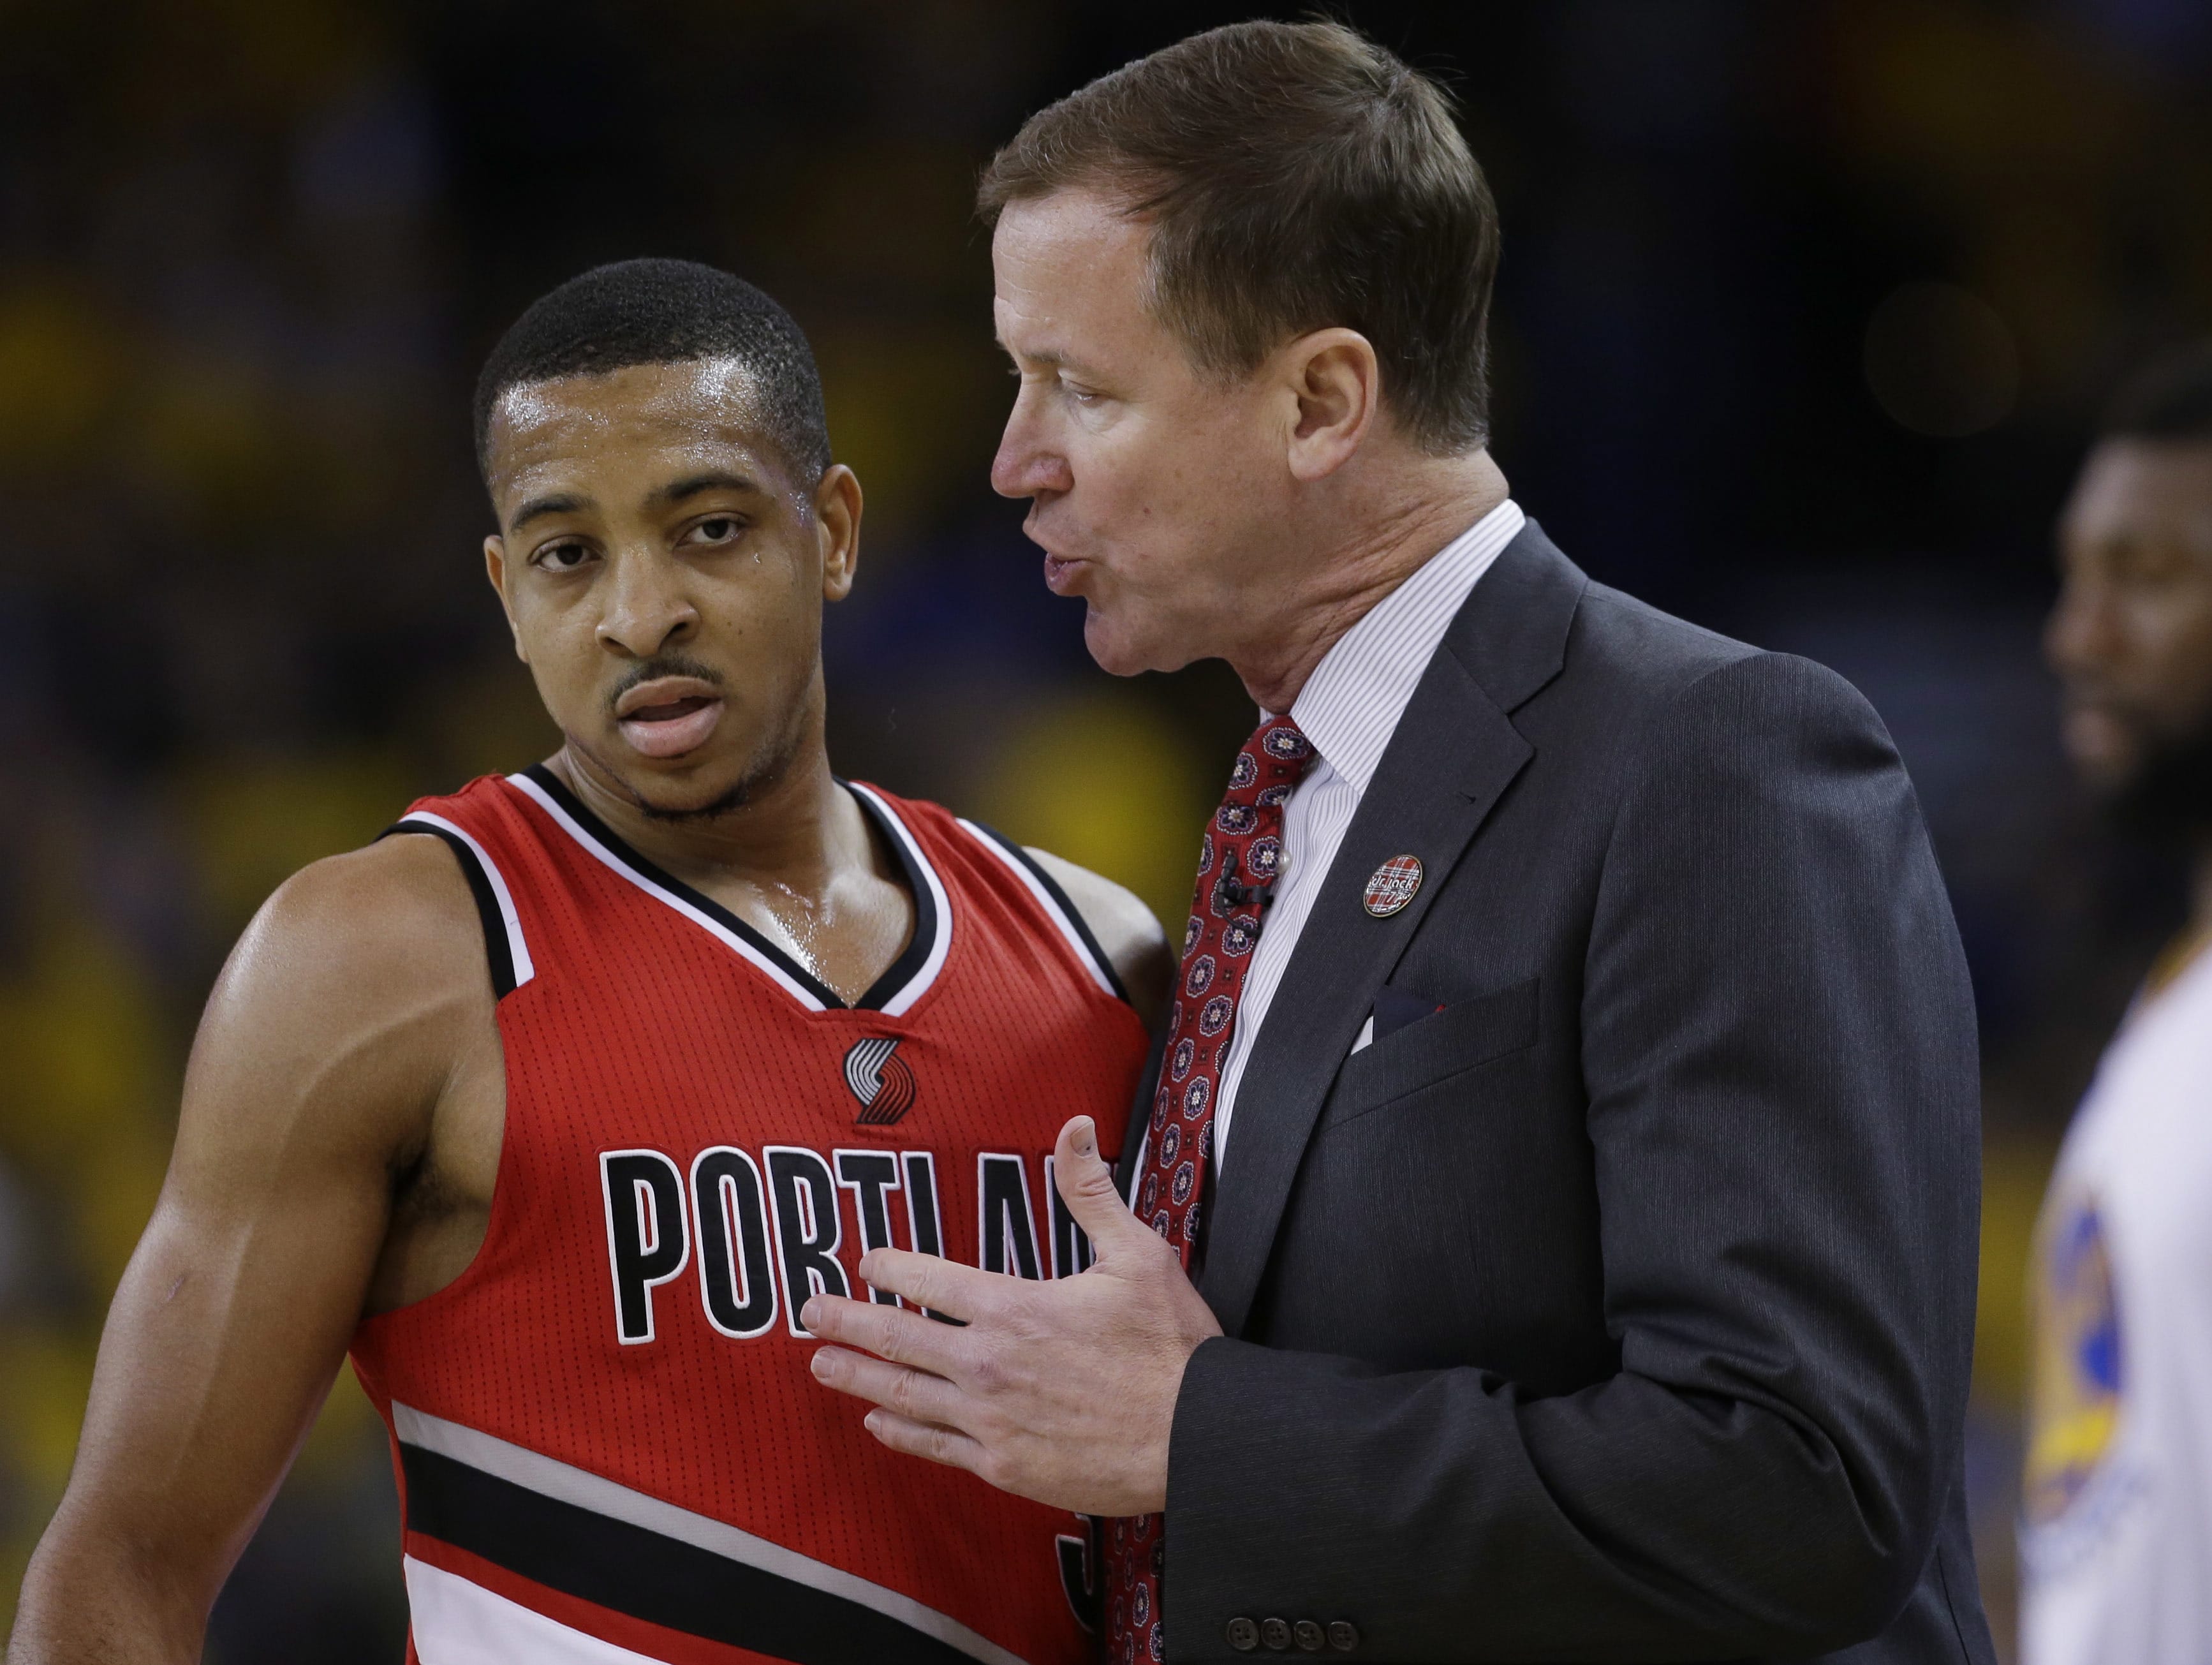 Portland Trail Blazers coach Terry Stotts, right, talks to guard C.J. McCollum during the first half in Game 5 of the team's second-round NBA basketball playoff series against the Golden State Warriors on Wednesday, May 11, 2016, in Oakland, Calif.